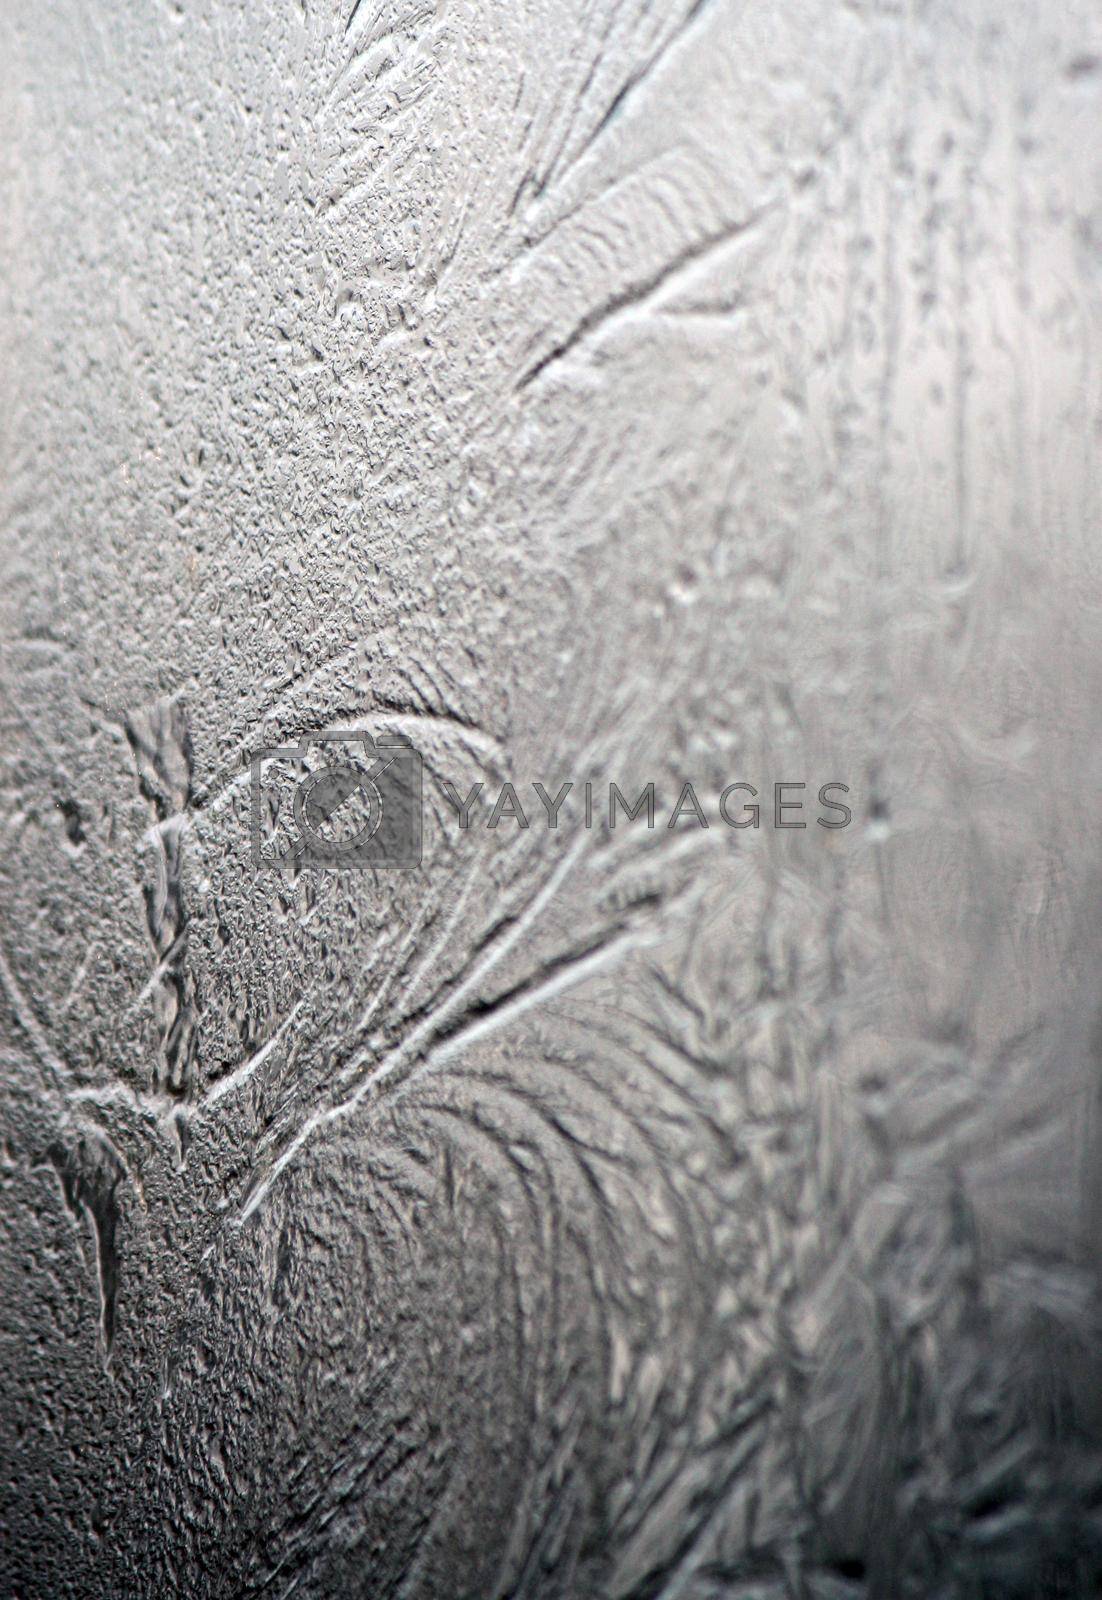 Royalty free image of Icy pattern on frozen window. by nightlyviolet